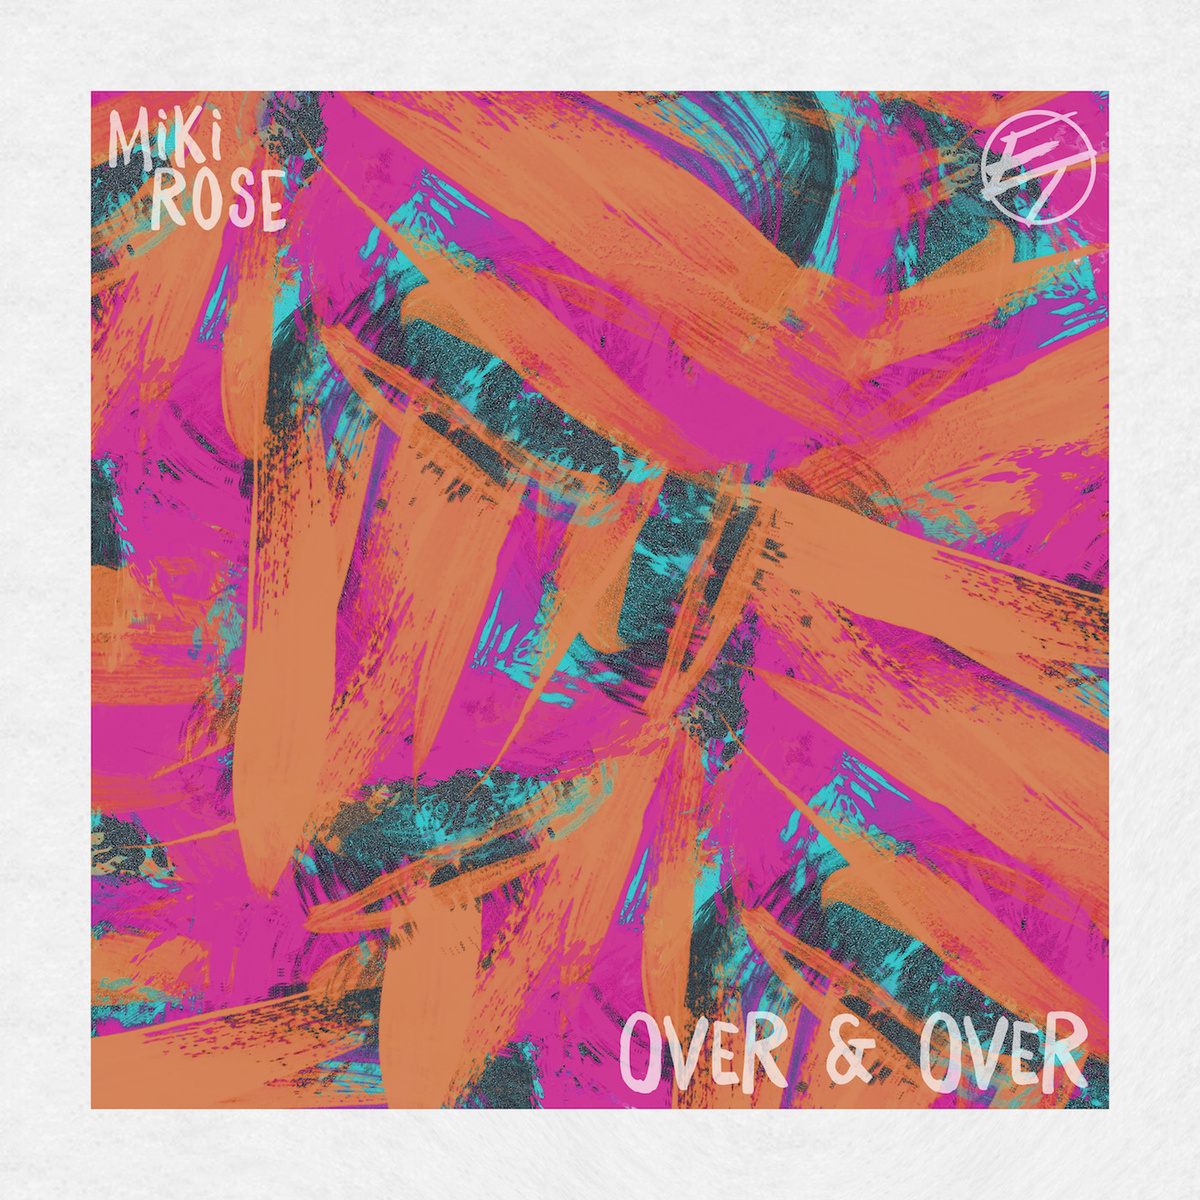 Over & Over EP